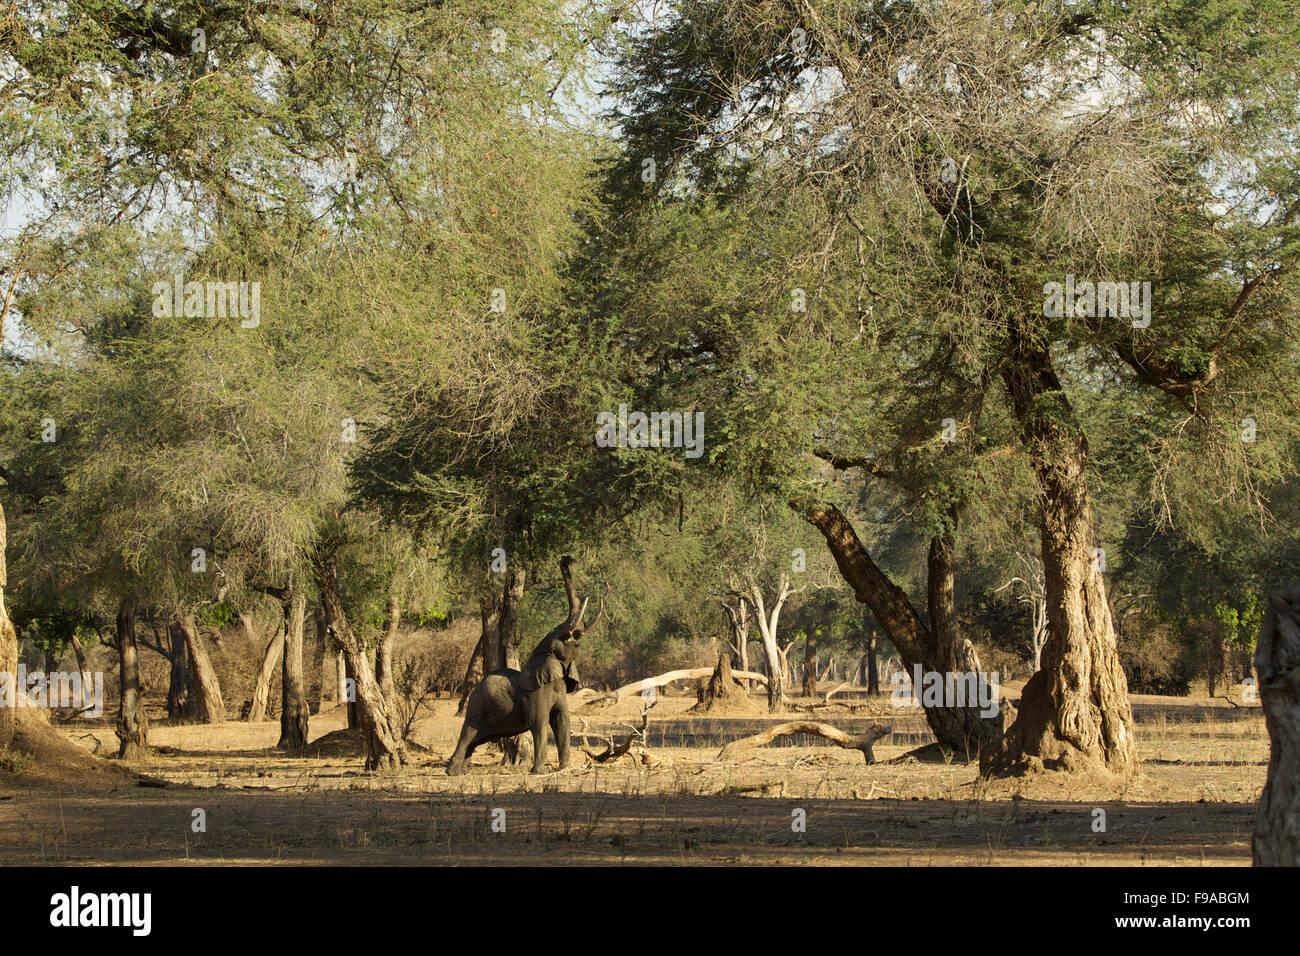 African elephant reaching up a tree to forage for food, Mana Pools, Zimbabwe Stock Photo